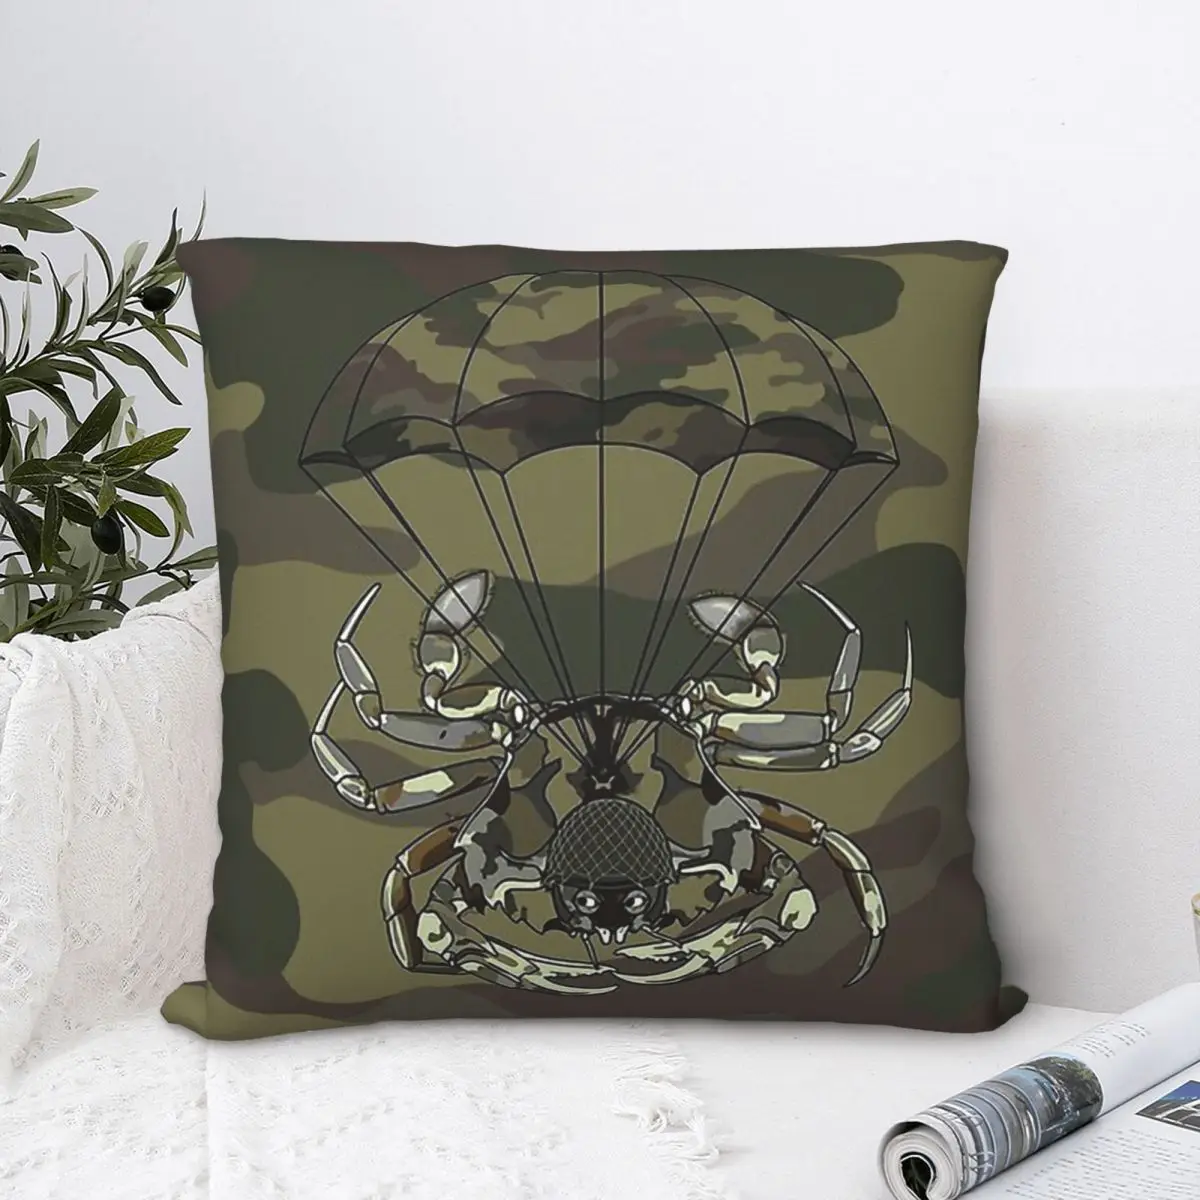 

Paratrooper Hug Pillowcase Battlefield FPS Game Backpack Cushion Garden DIY Printed Car Coussin Covers Decorative